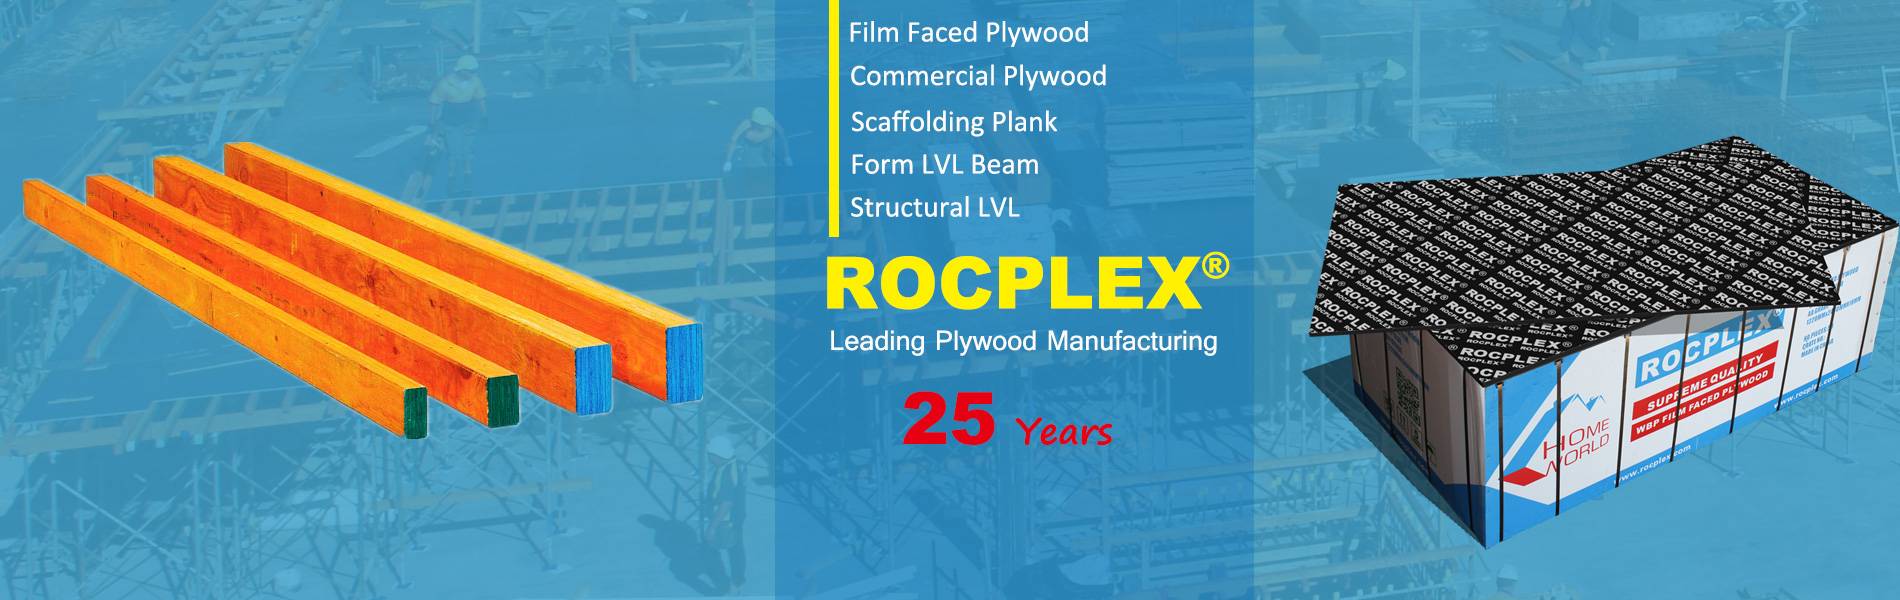 Frame LVL, Form LVL, F17 formply and film faced plywood Supplier - ROCPLEX China